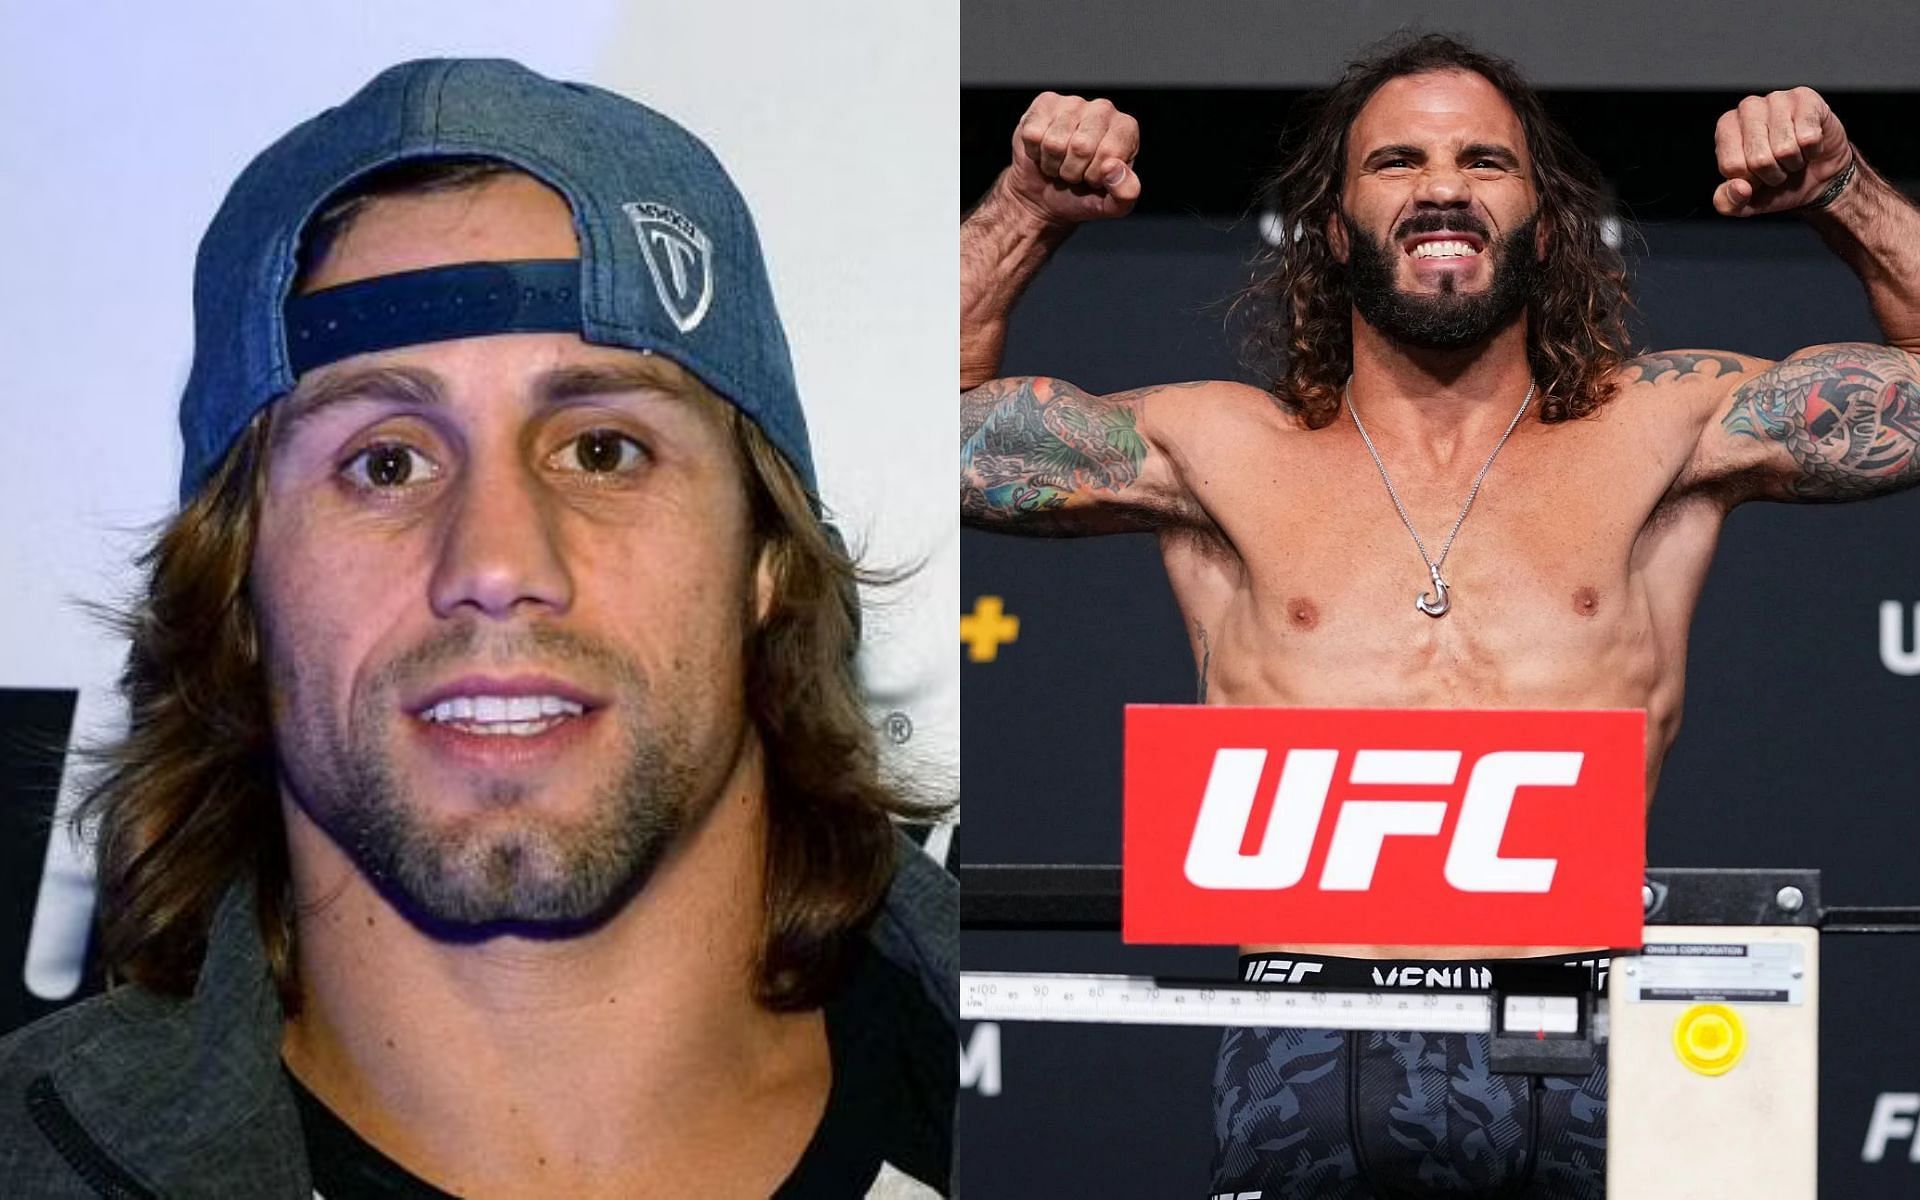 Urijah Faber (left) and Clay Guida (right)